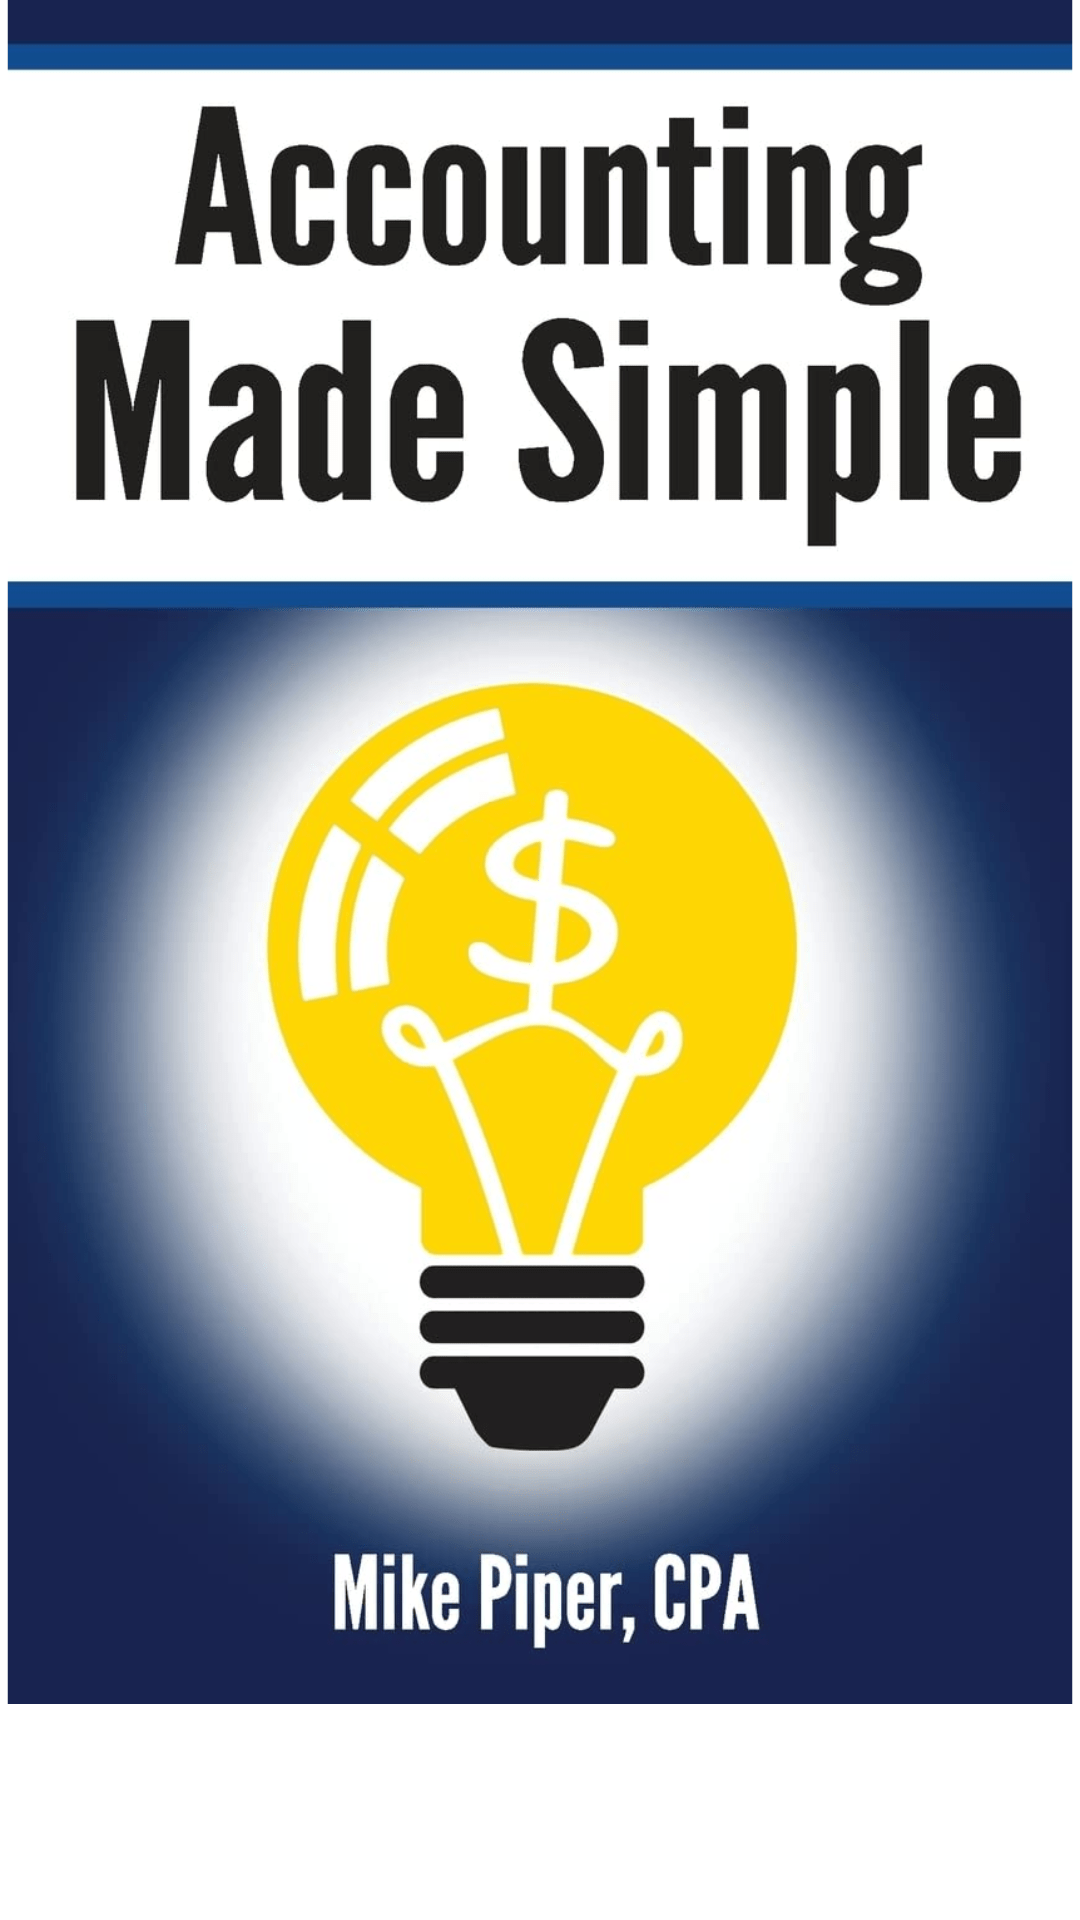 Accounting Made Simple by Mike Piper